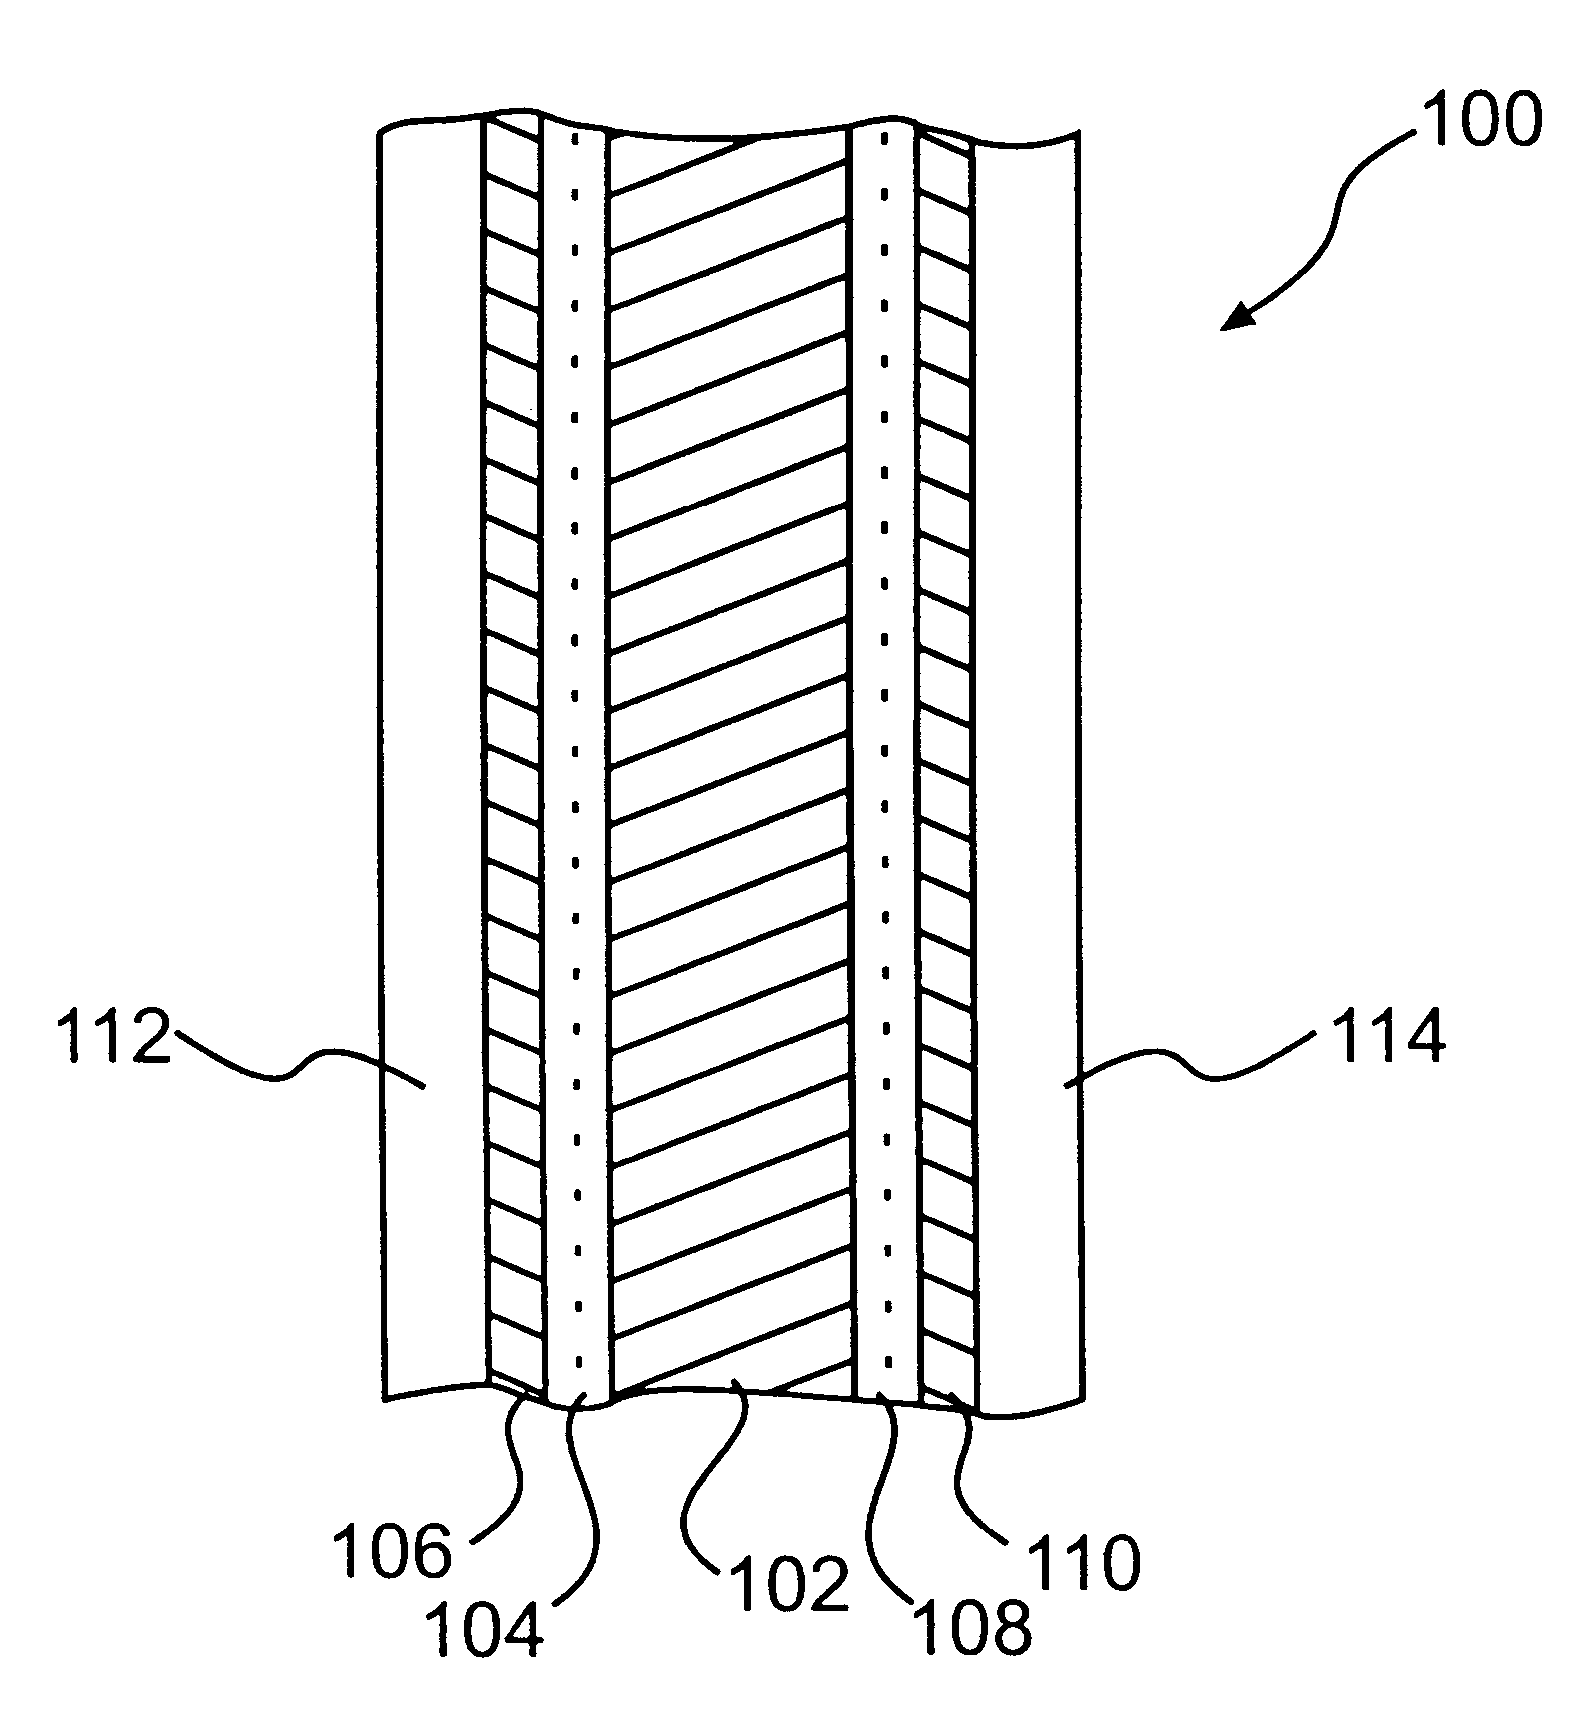 Narrow composition distribution polyvinylidene fluoride RECLT films, processes, articles of manufacture and compositions